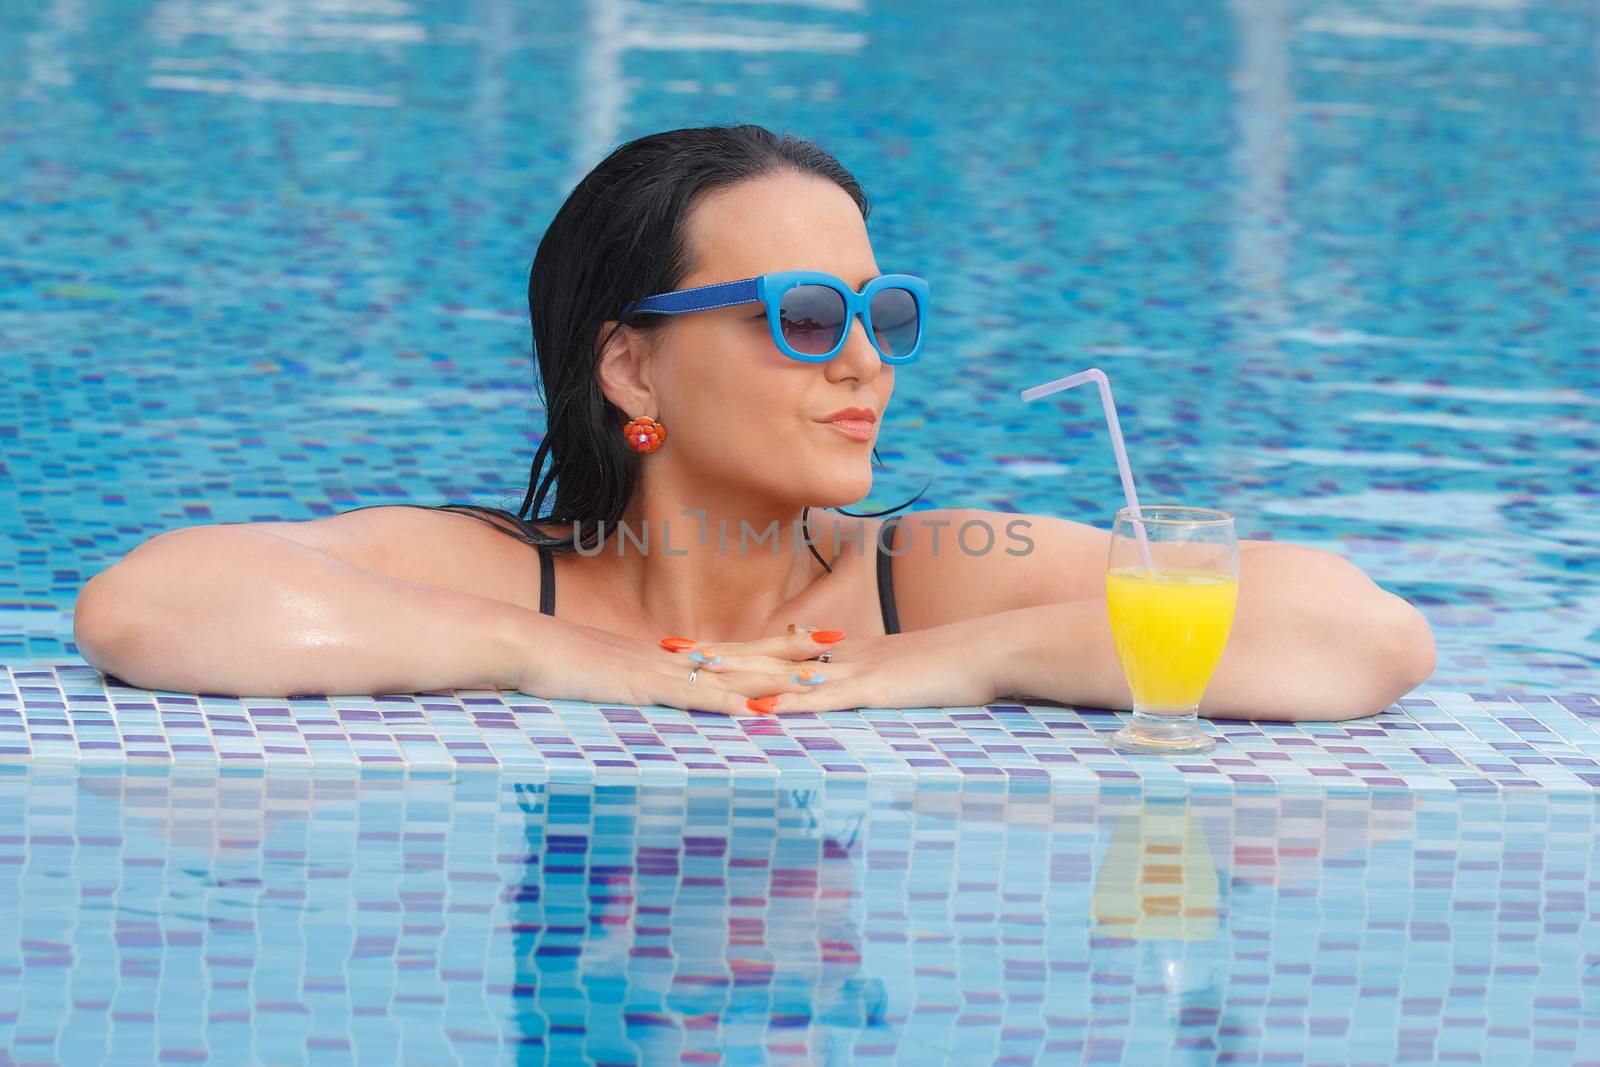 Woman drinking a fruit juice and enjoying in a swimming pool during a sunny day . Summer and holiday concept